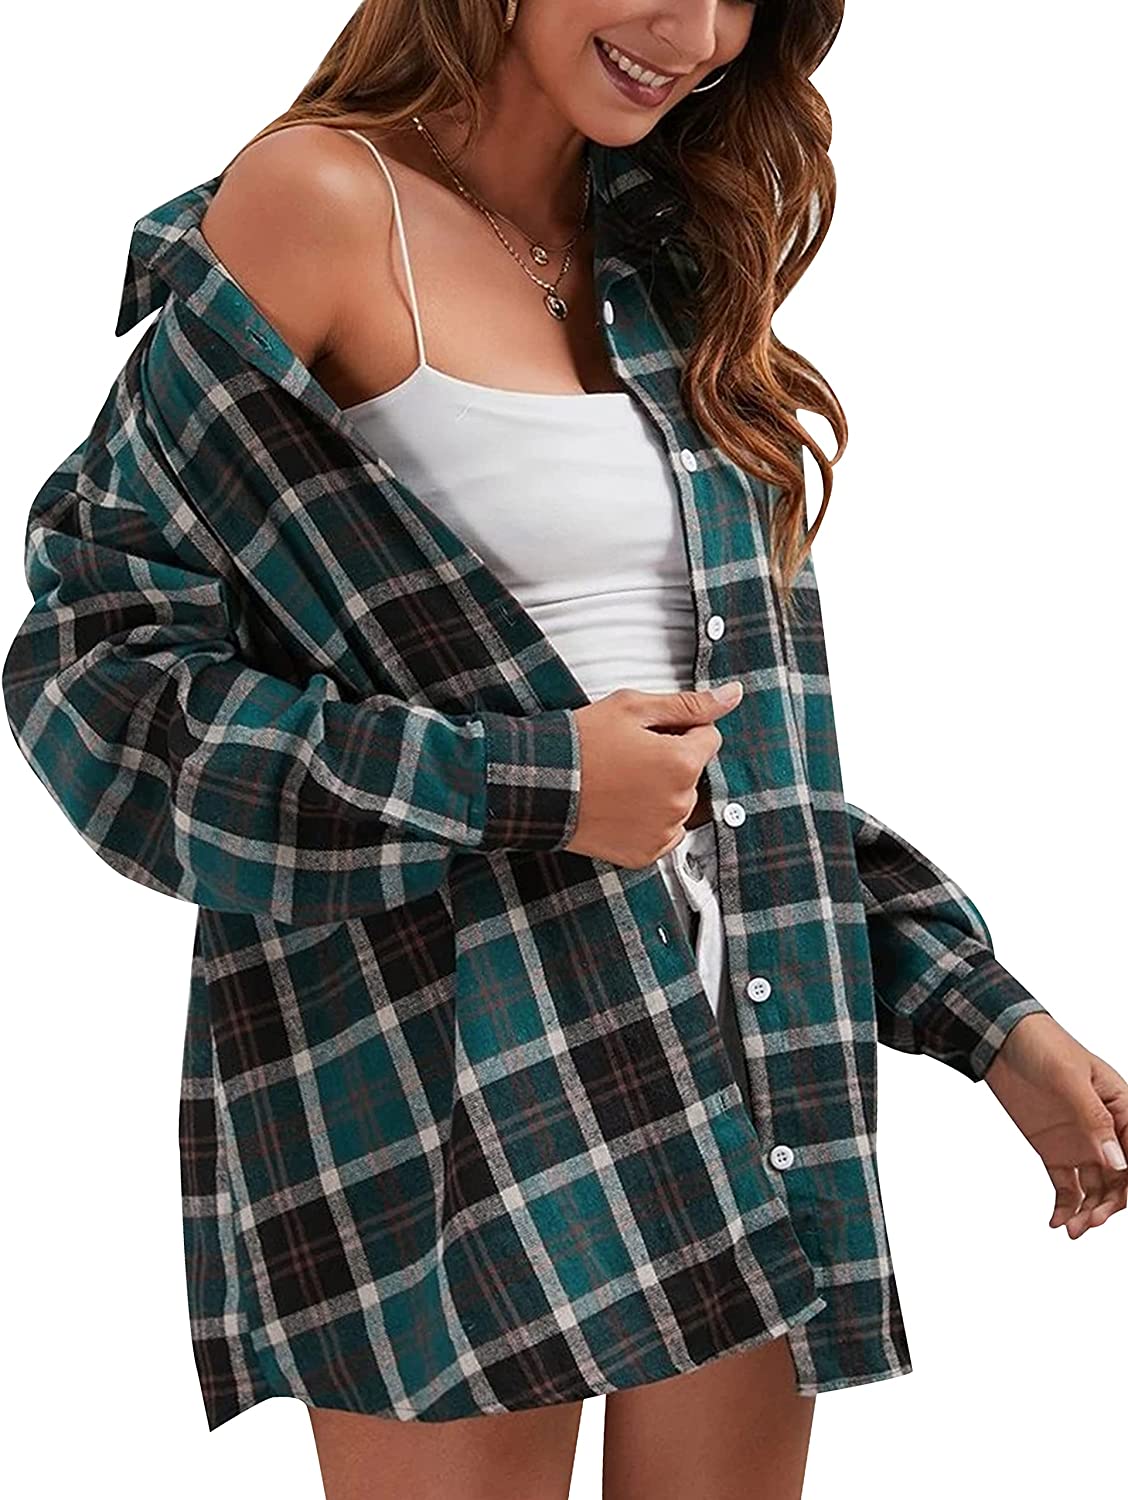 HangNiFang Womens Flannel Plaid Shirts Oversized Button Down Shirts Blouse Tops 